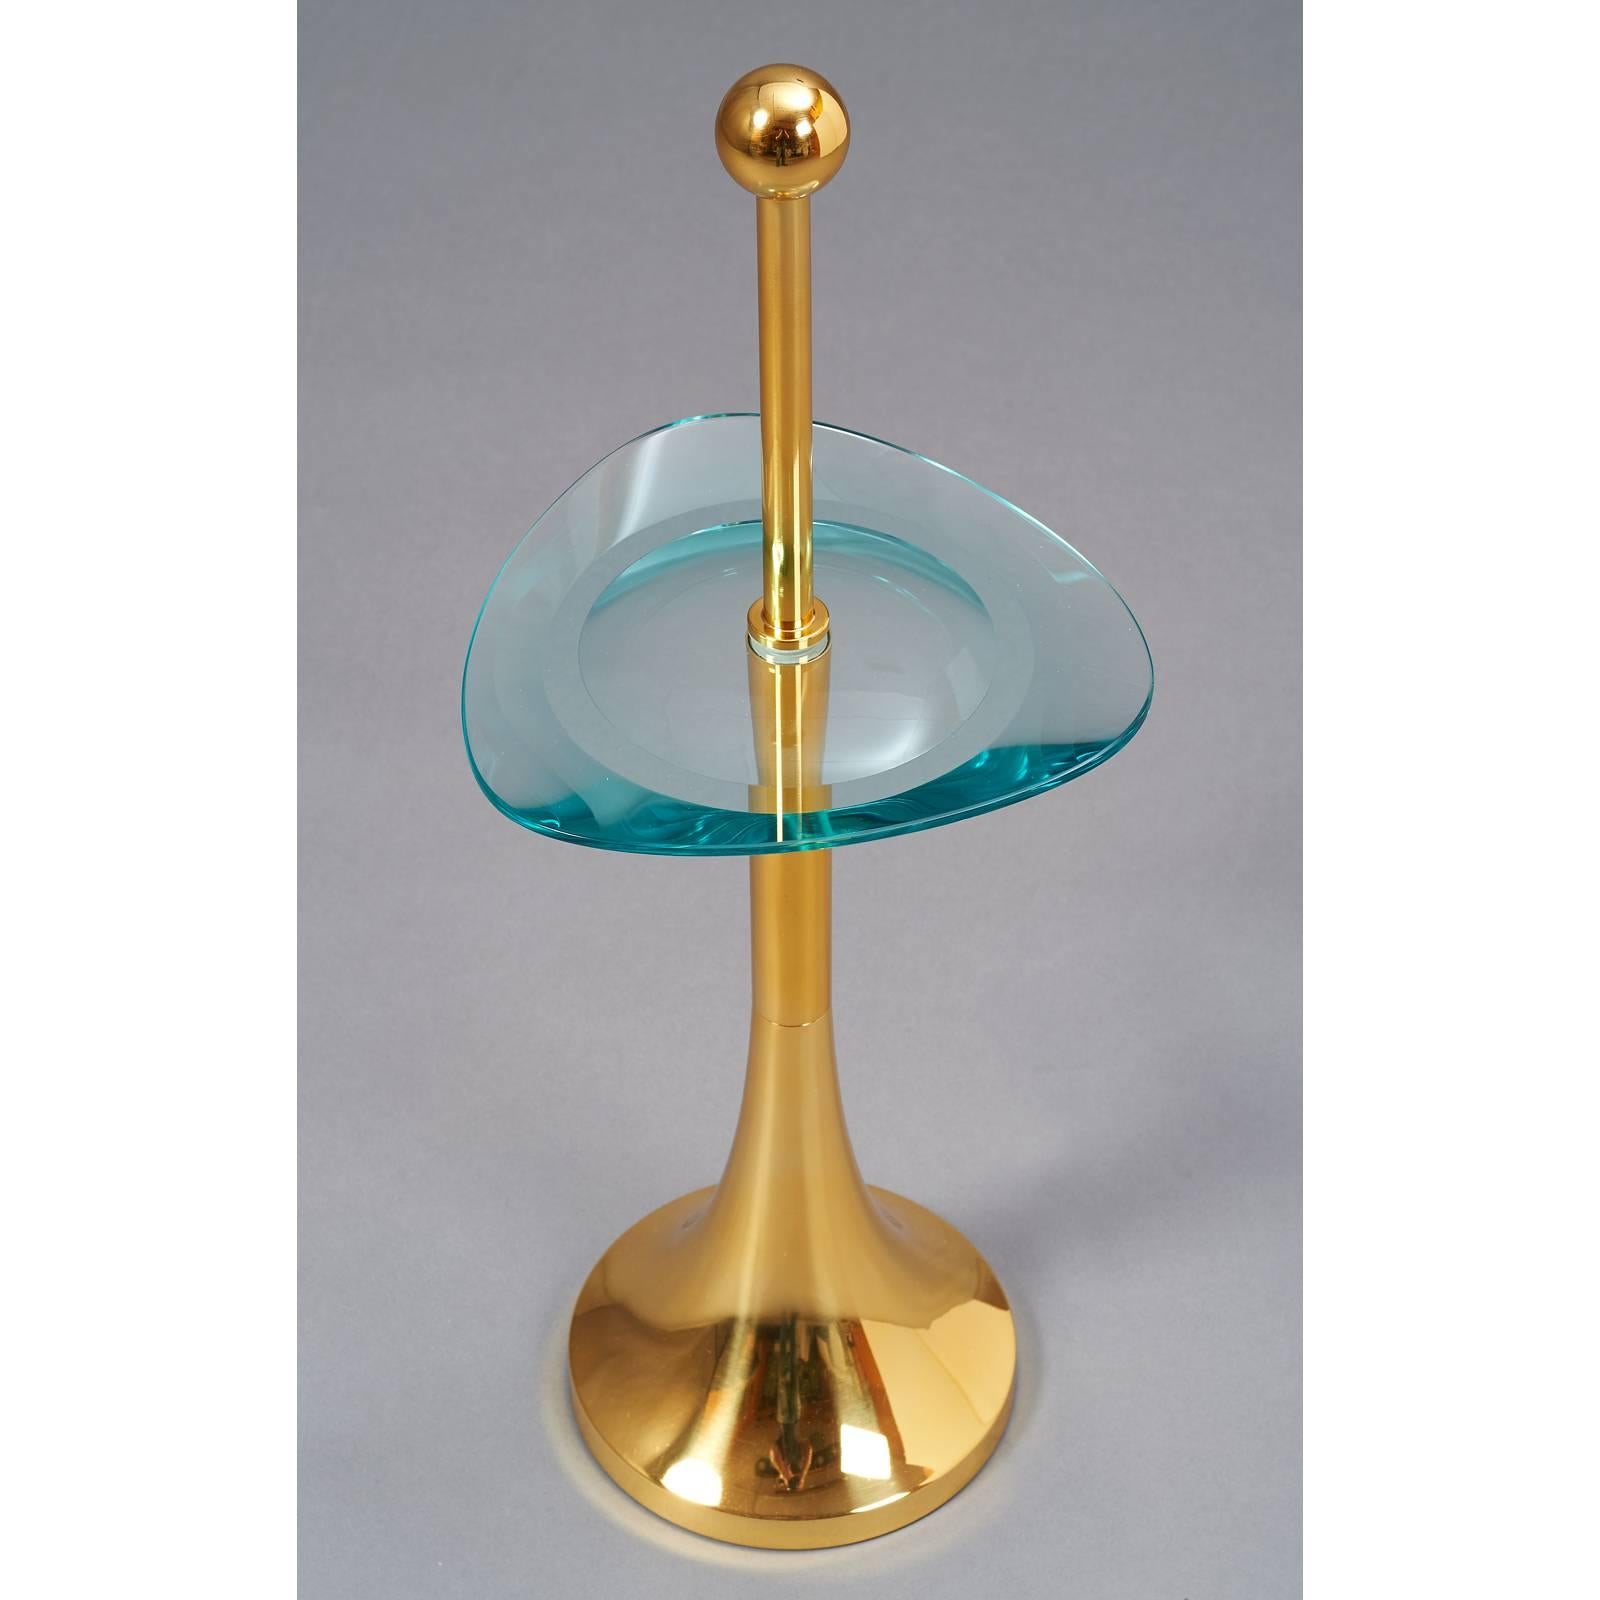 Italy, 1970s.
Pedestal side table in the style of Fontana Arte
with beautifully ground and double beveled triangular glass top.
Polished brass base.
Dimensions: 11 Ø x 18 H at glass tray/28 H overall.